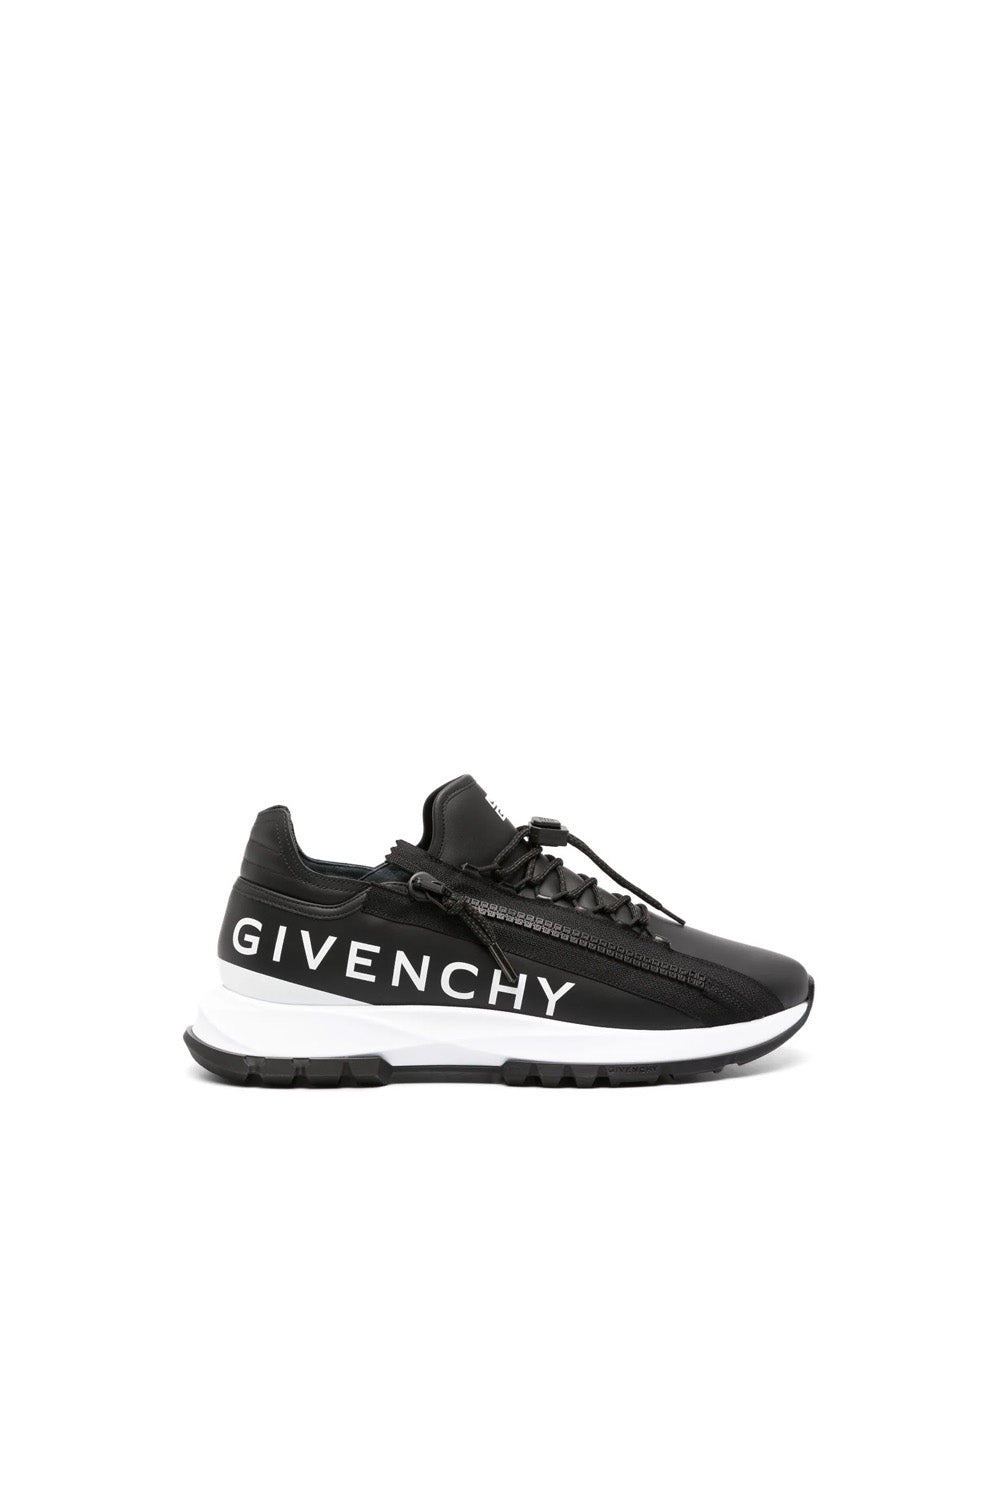 Givenchy Spectre logo-print zip sneakers